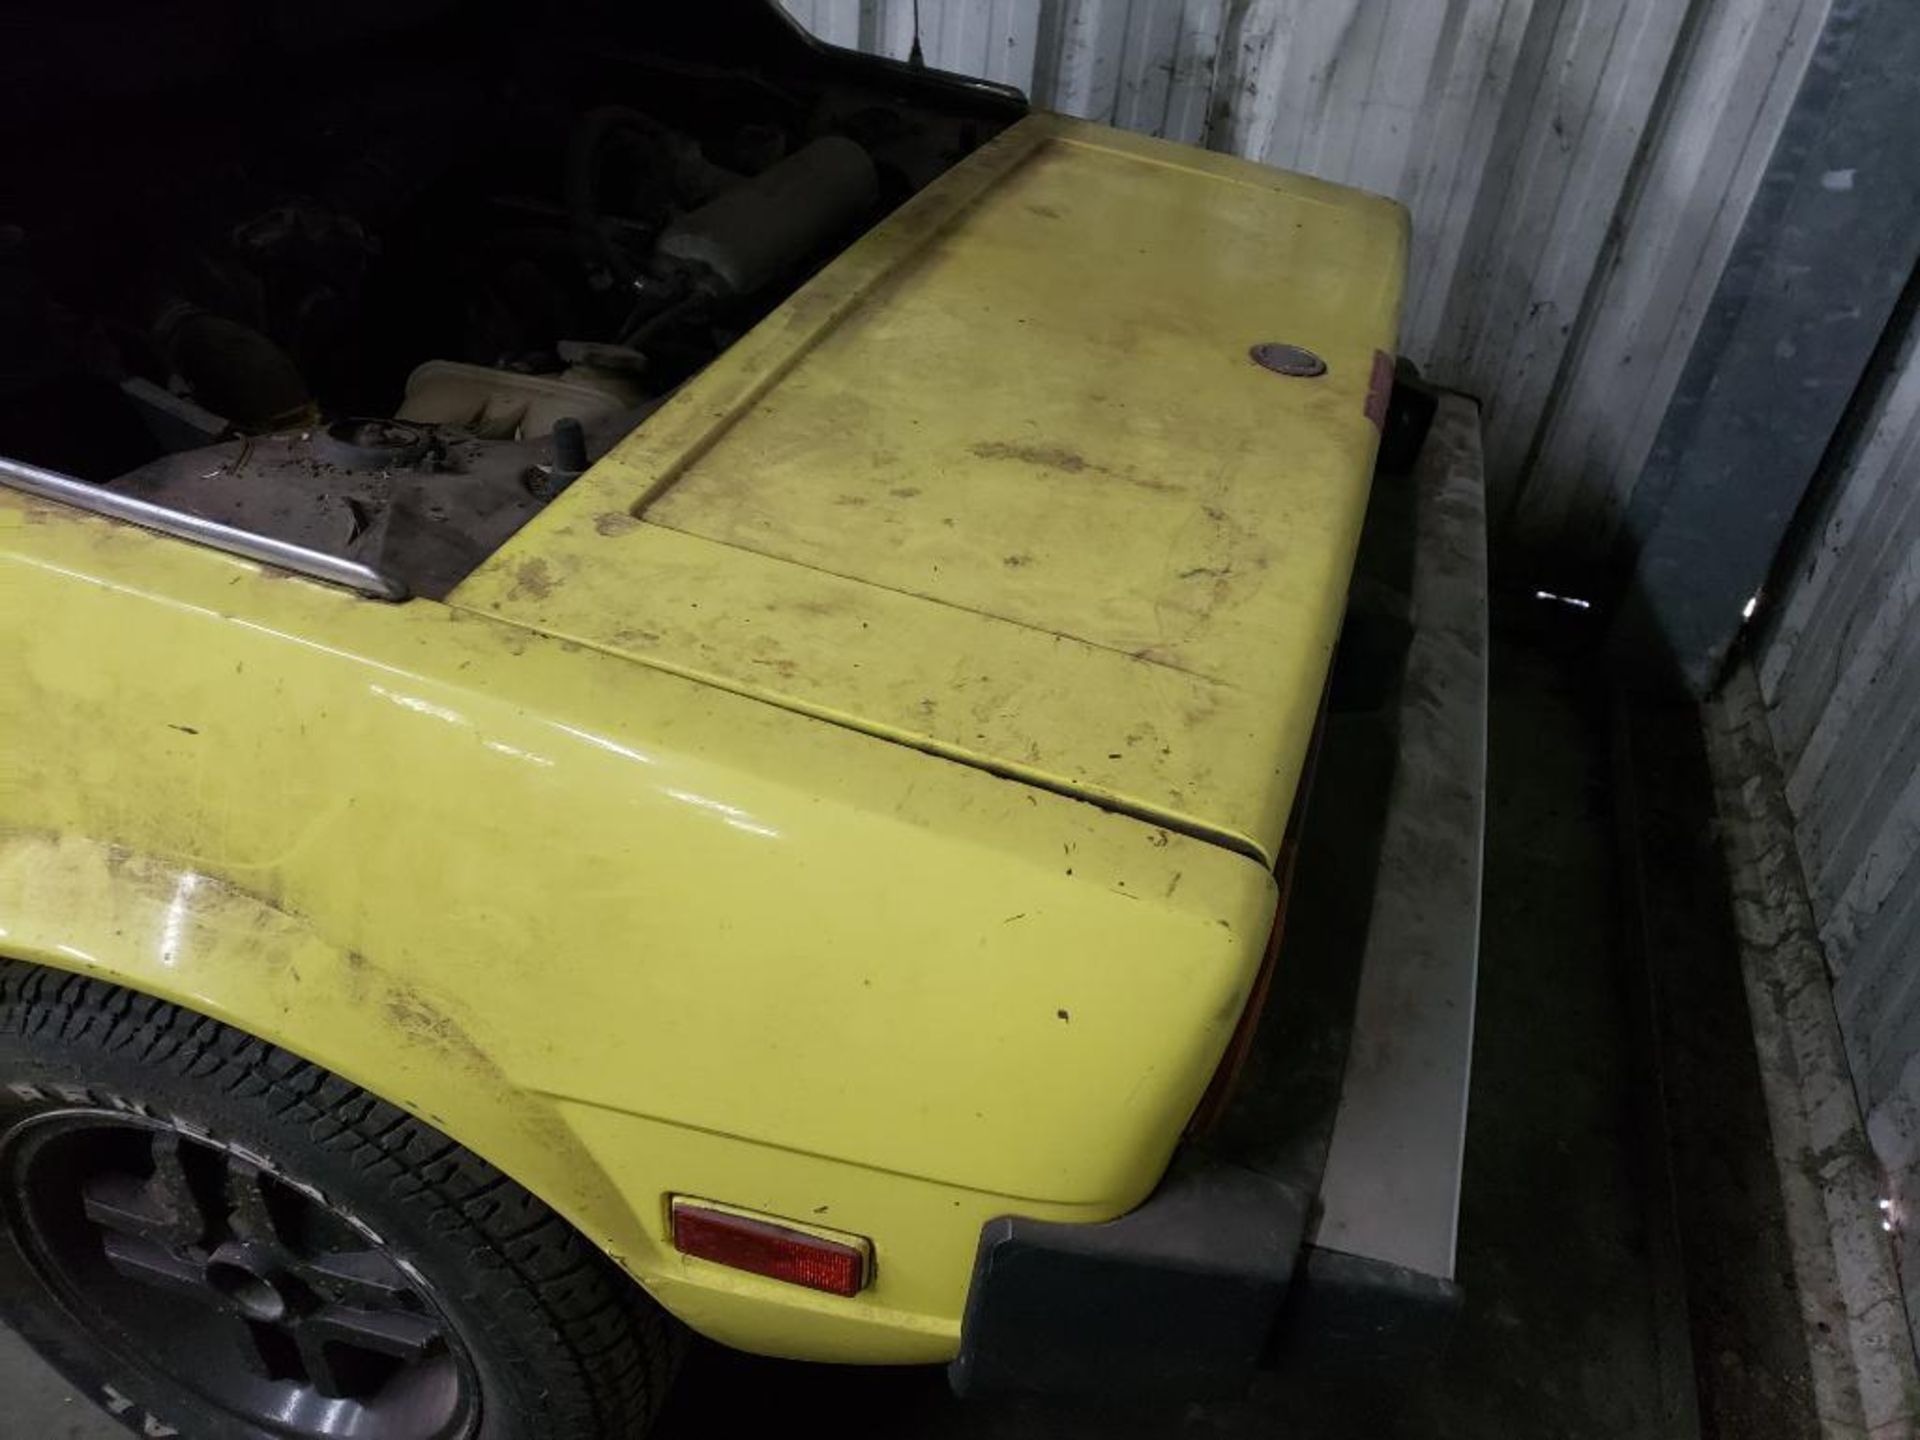 1981 Fiat Bertone. VIN number ZFABS00A6B8142844. Parts repairable. Vehicle IS titled. - Image 16 of 29